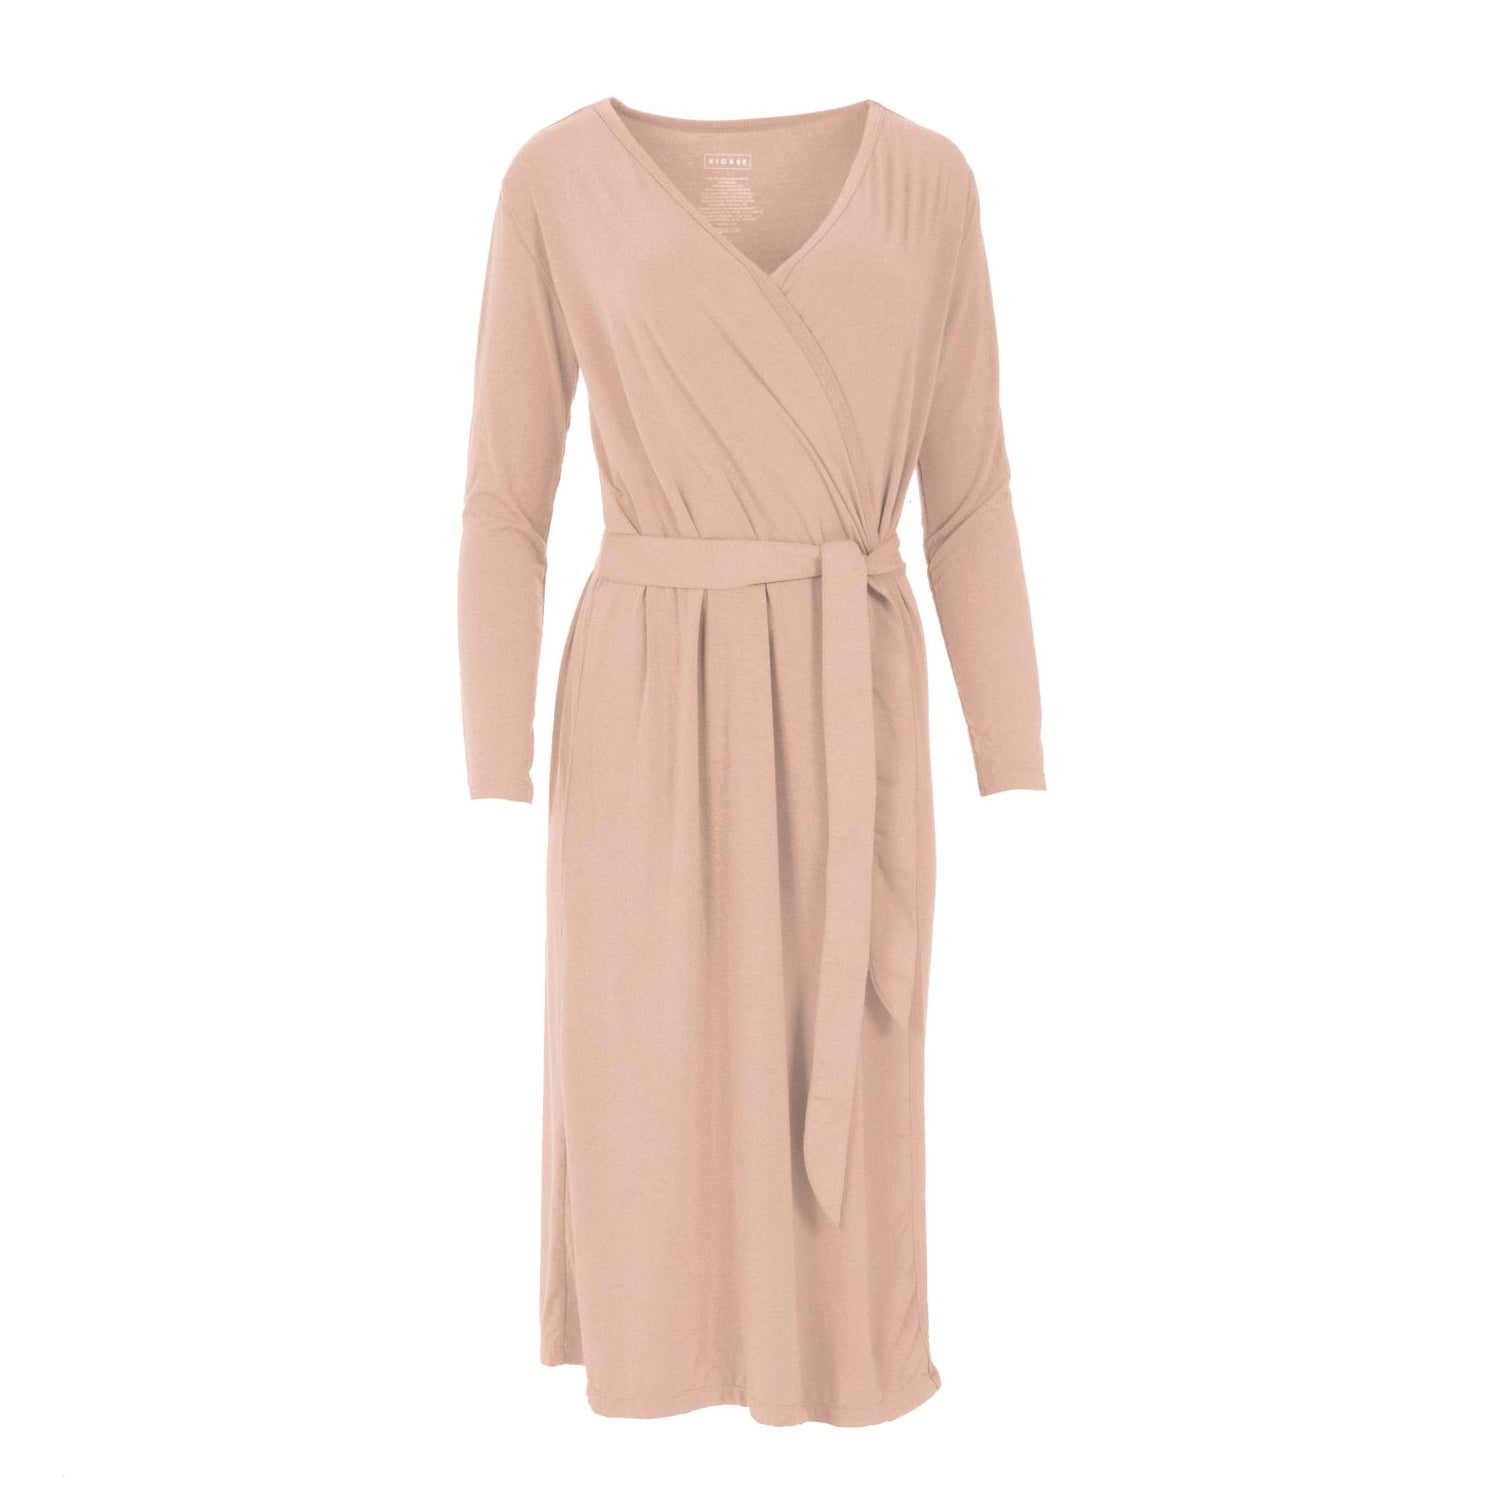 Women's Solid Basic Robe in Peach Blossom